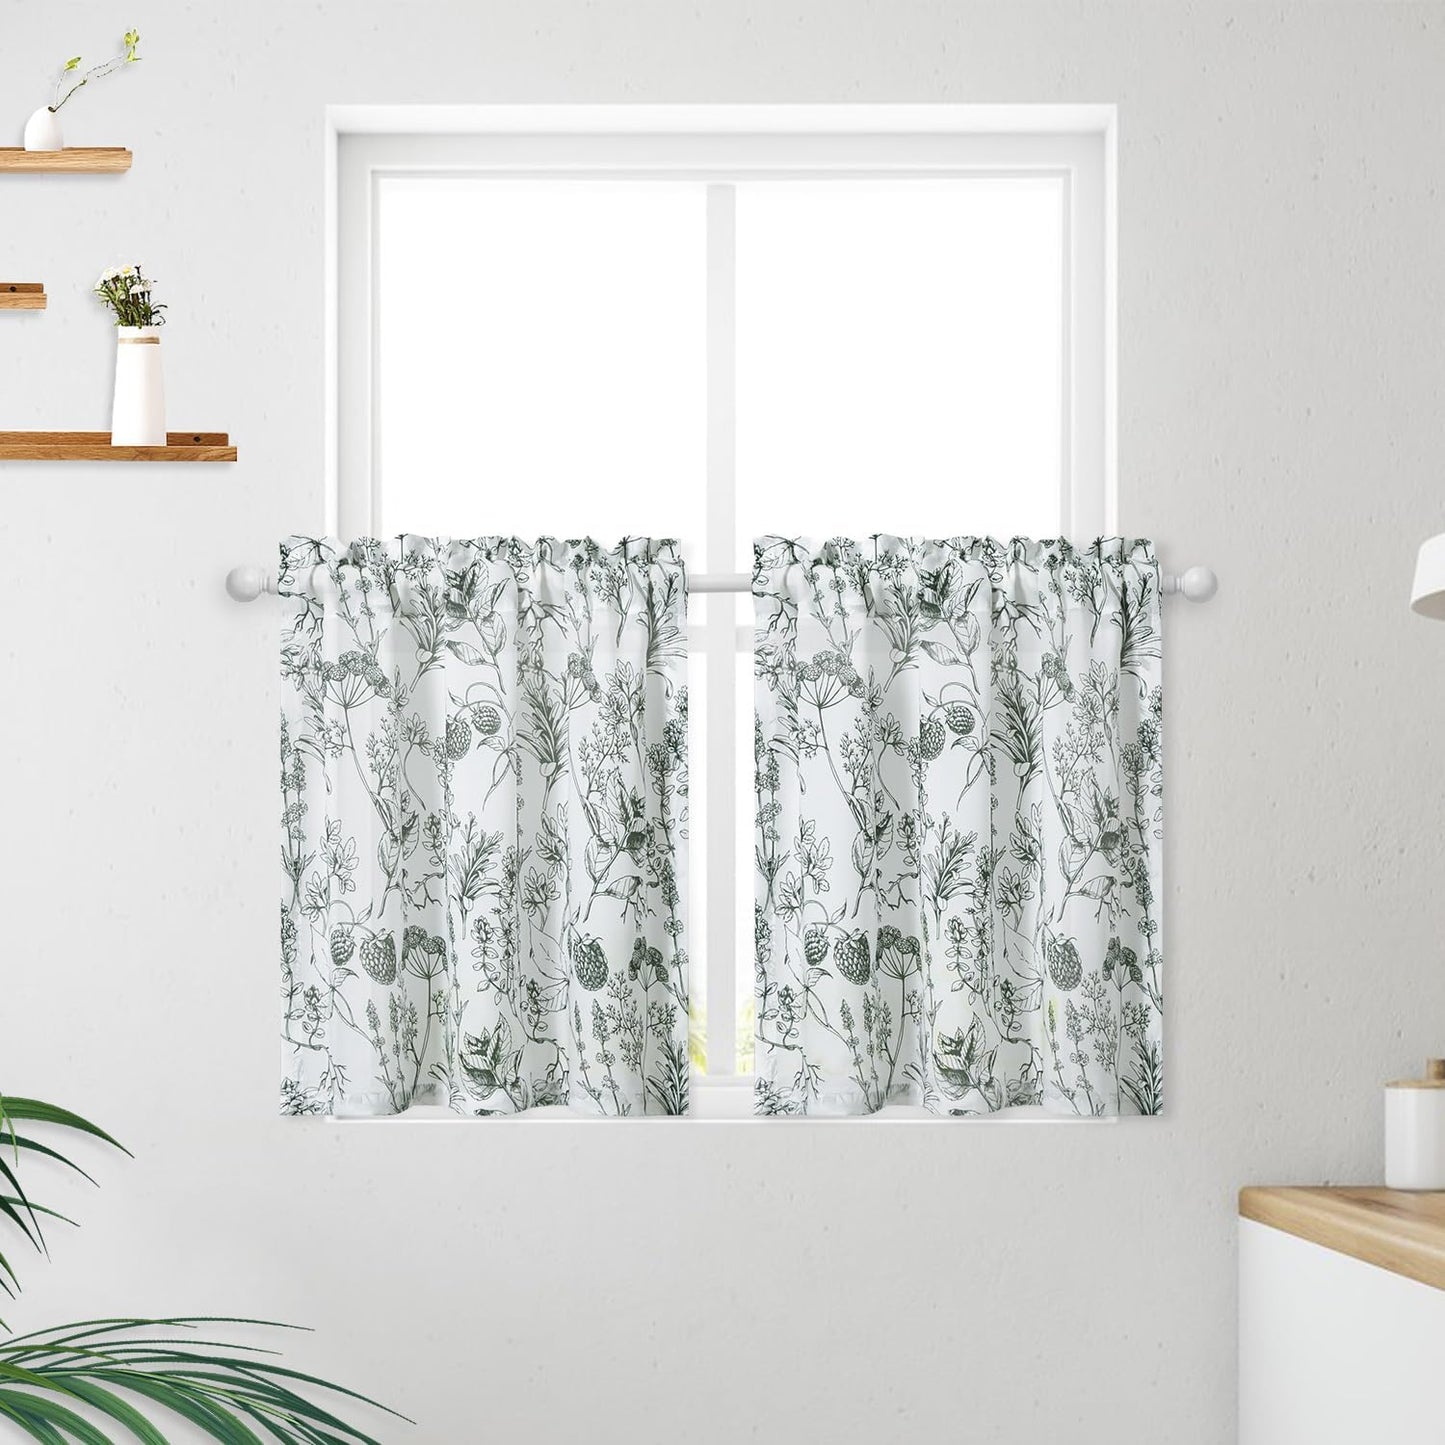 VOGOL Colorful Floral Print Tier Curtains, 2 Panels Smooth Textured Decorative Cafe Curtain, Rod Pocket Sheer Drapery for Farmhouse, W 30 X L 24  VOGOL Mn010 W30 X L24 